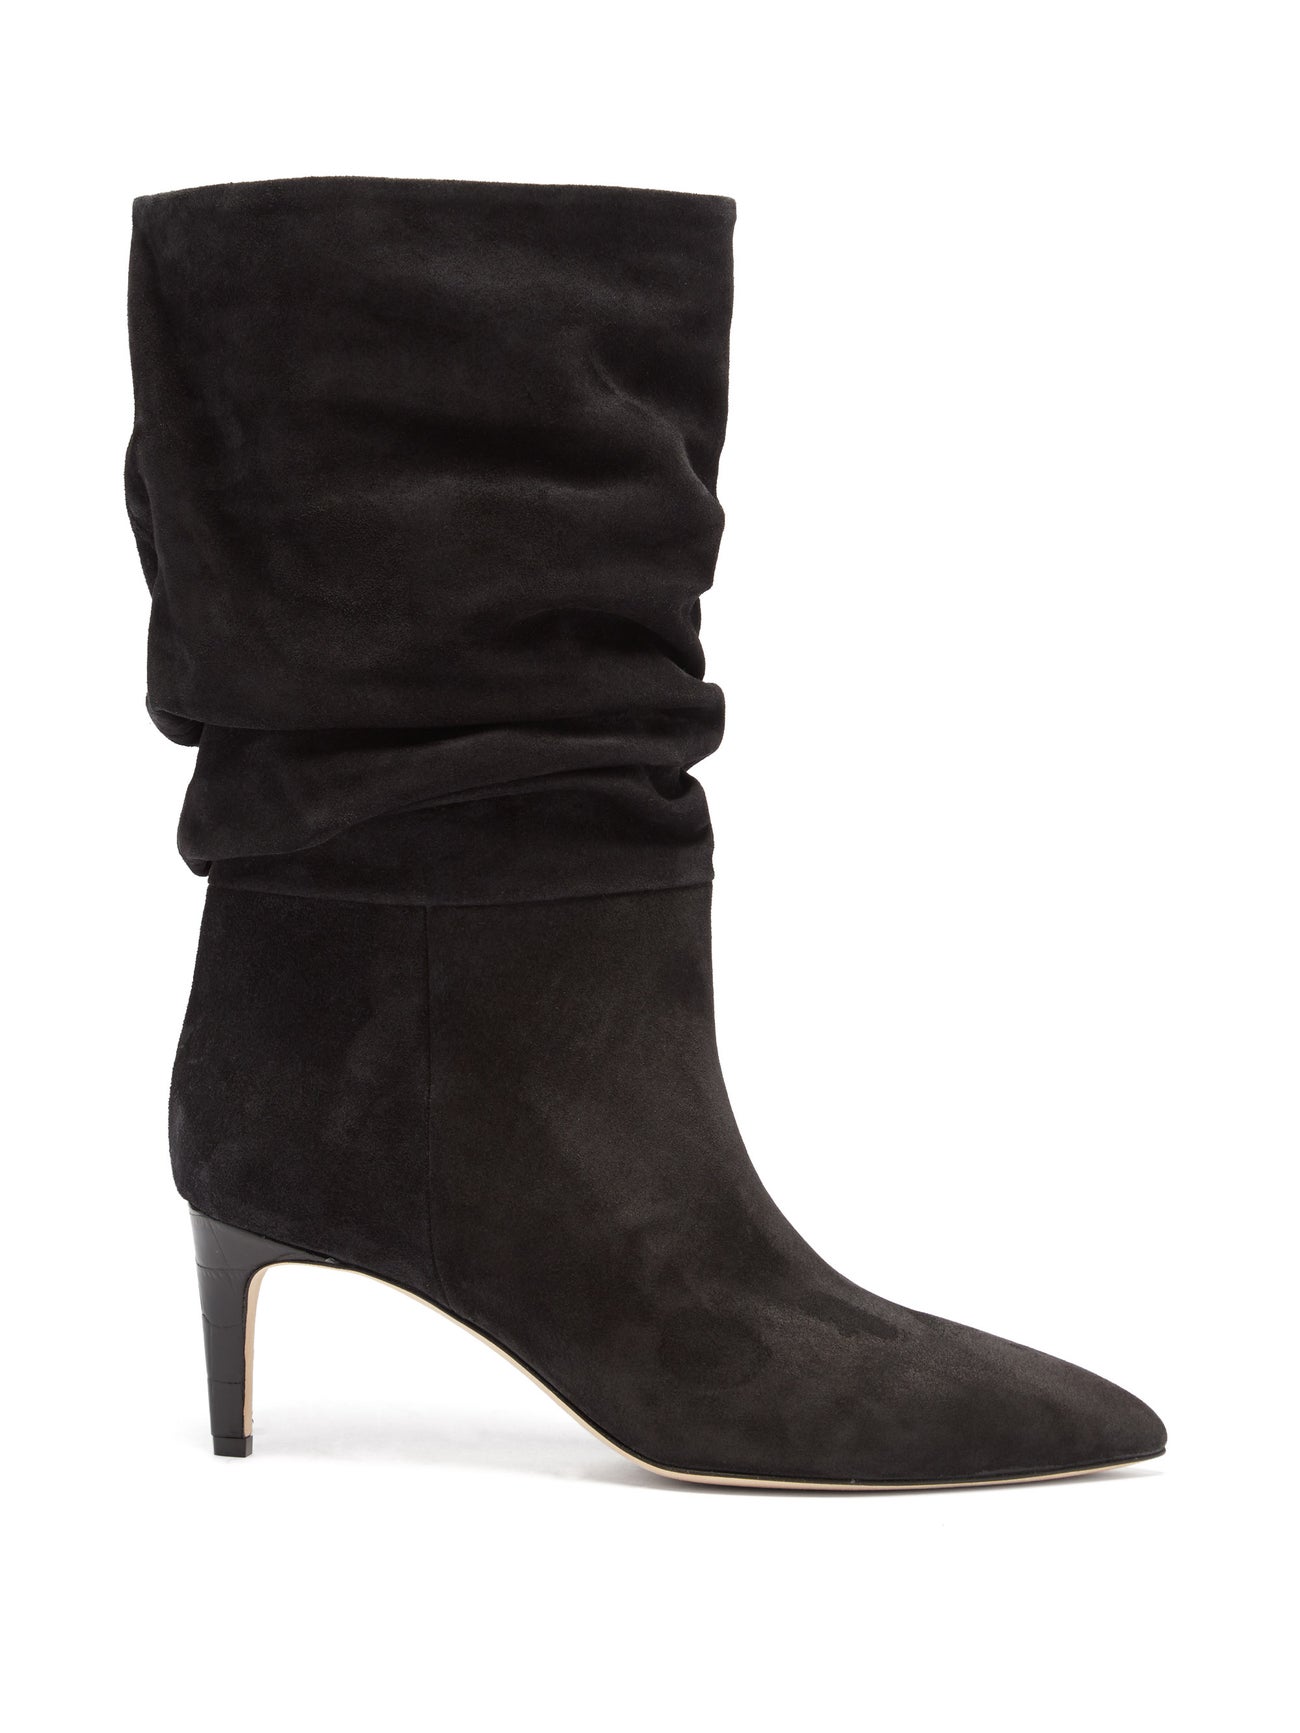 Paris Texas Slouchy Suede Boots